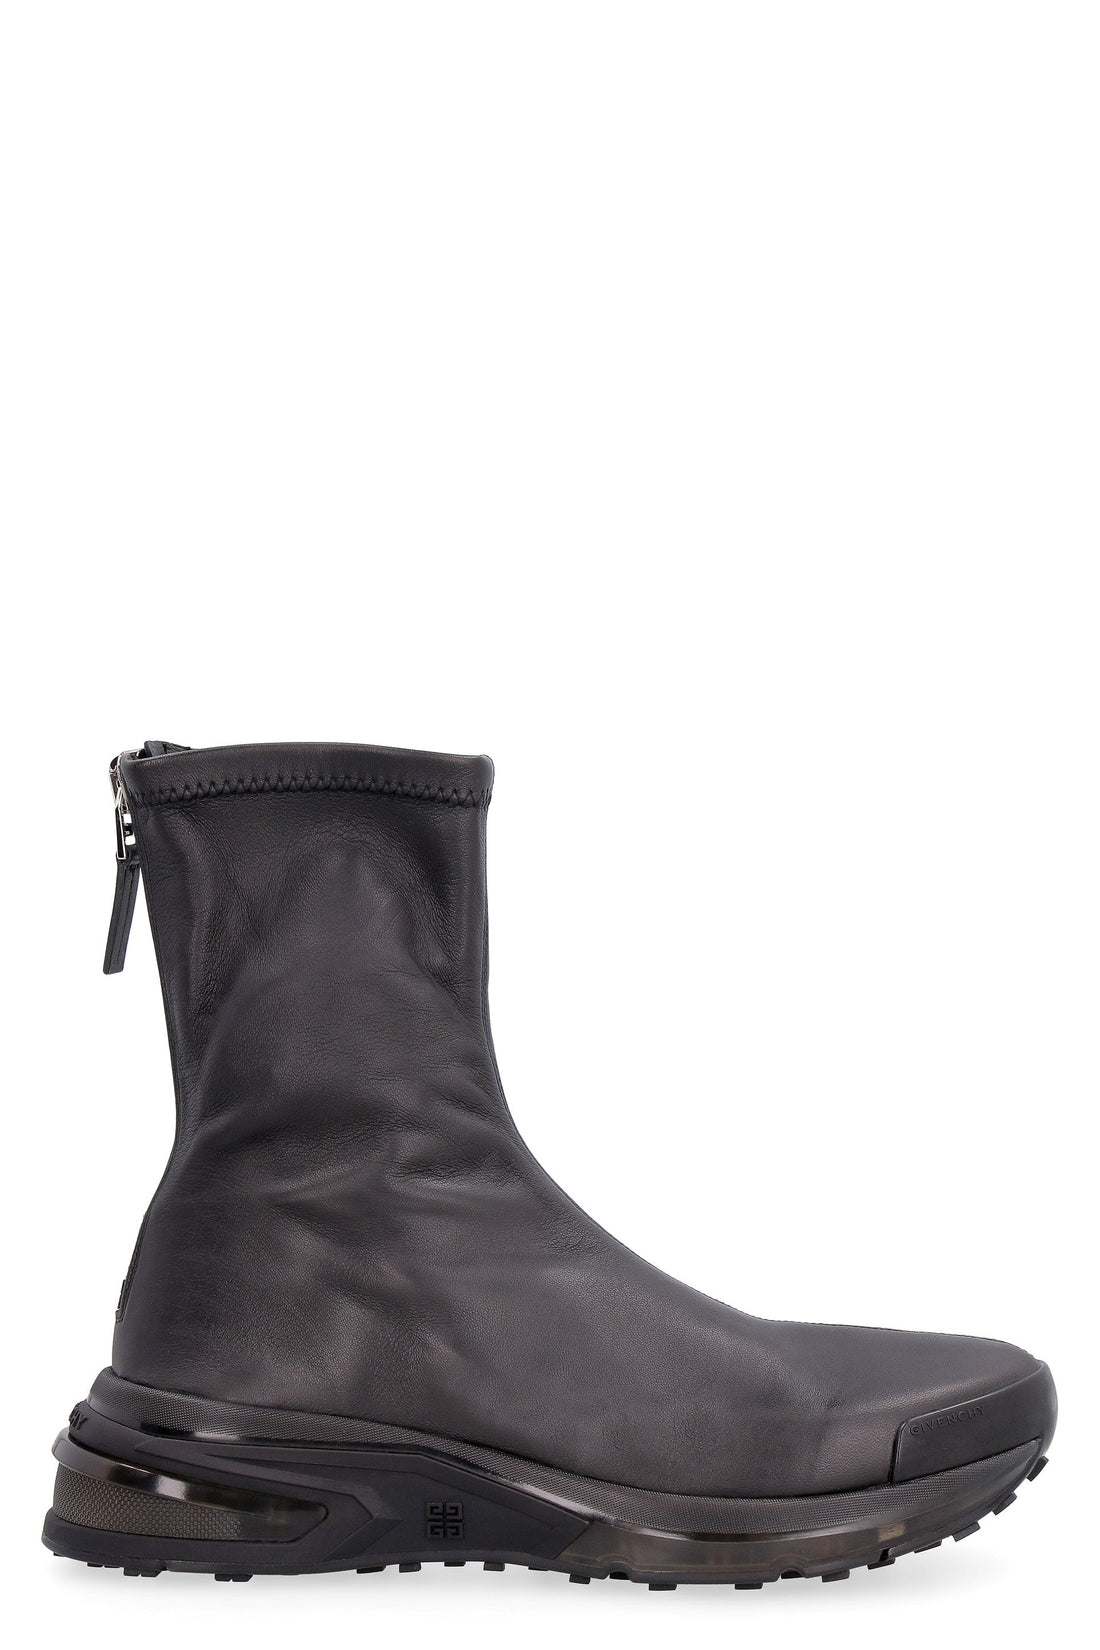 Givenchy-OUTLET-SALE-GIV 1 leather ankle boots-ARCHIVIST